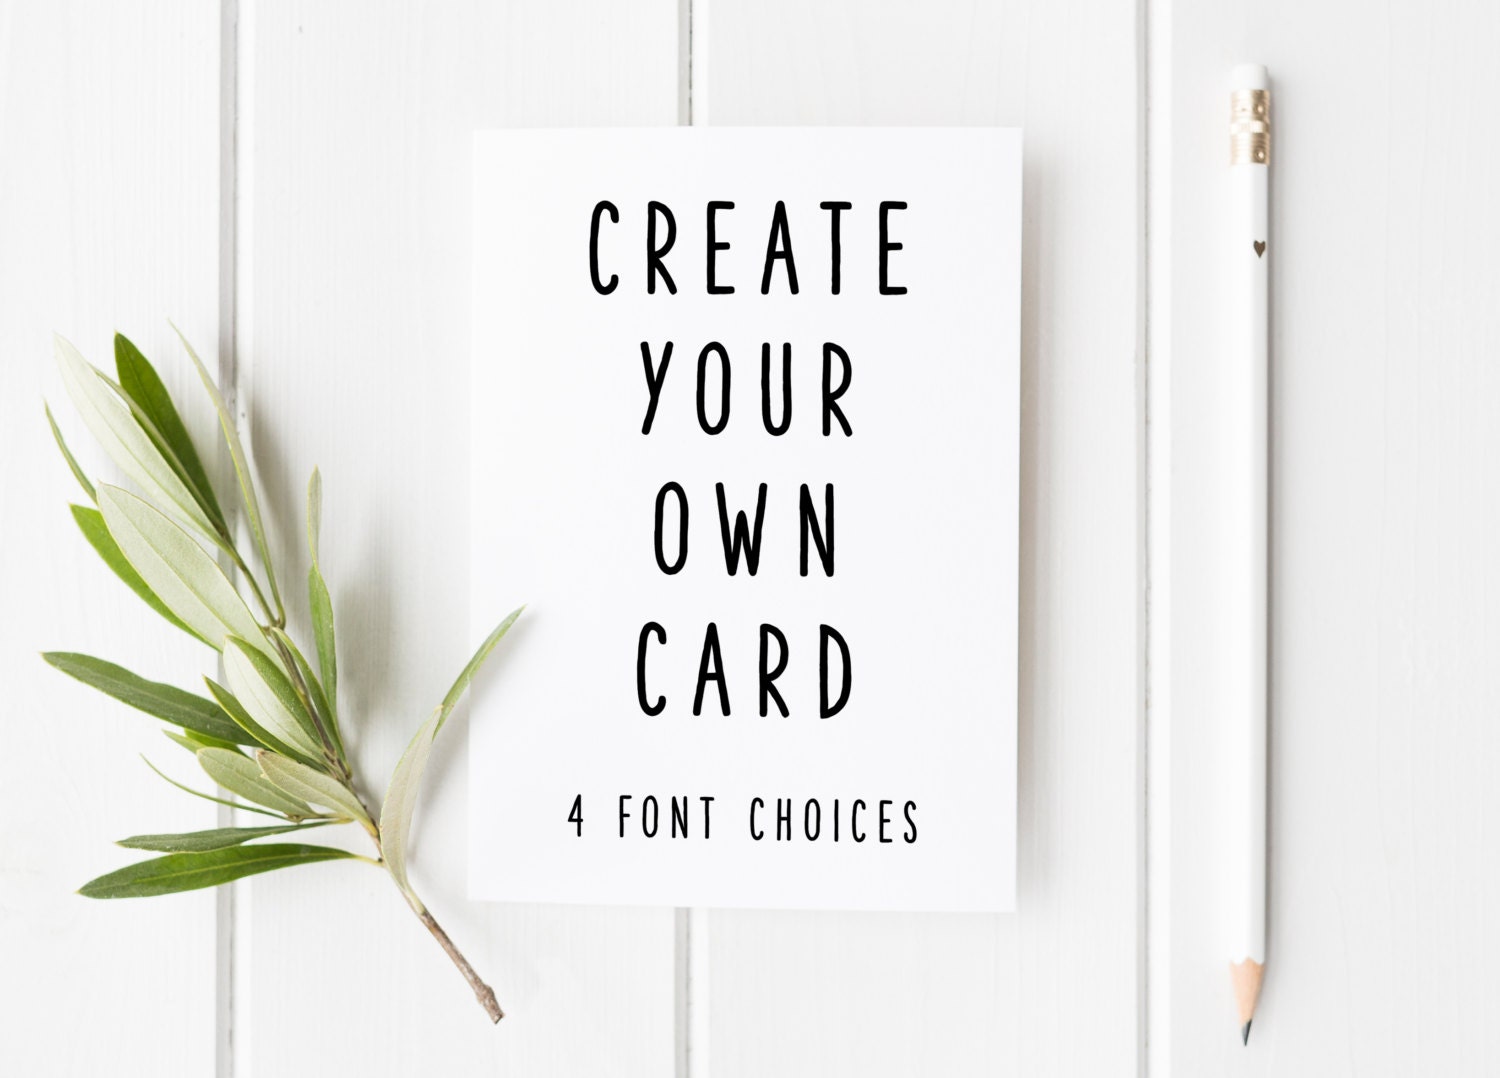 How To Make Your Own Cards With Photos Best Design Idea